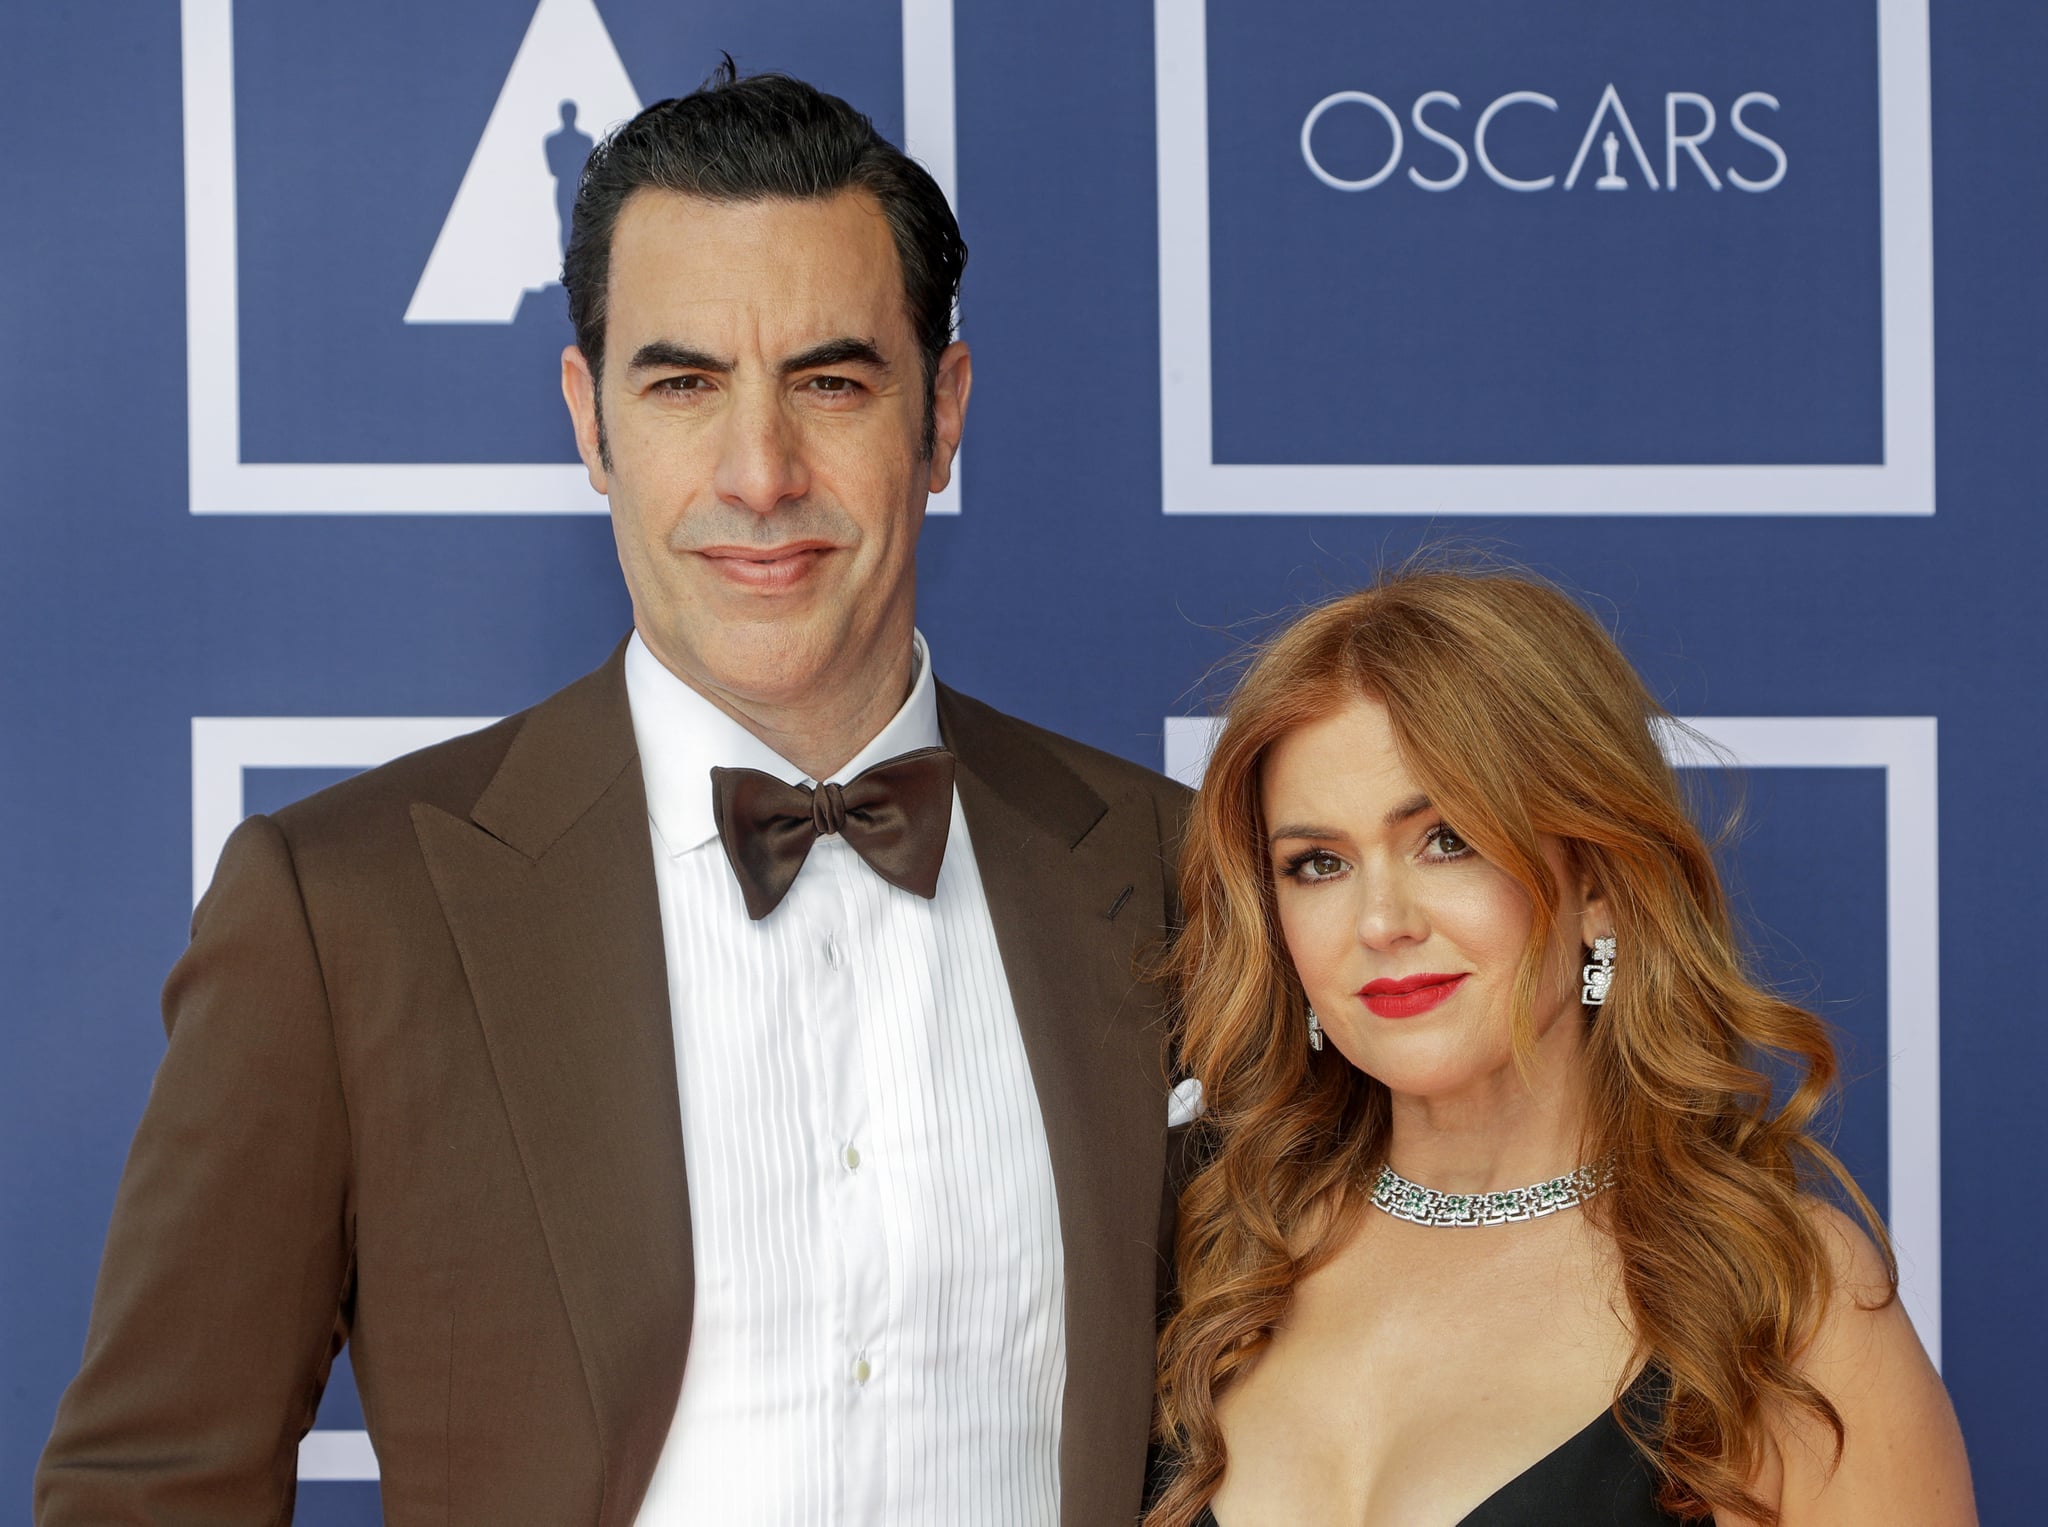 SYDNEY, AUSTRALIA - APRIL 26: Sacha Baron Cohen (L) and Isla Fisher attend a screening of the Oscars on Monday April 26, 2021 in Sydney, Australia. (Photo by Rick Rycroft-Pool/Getty Images)